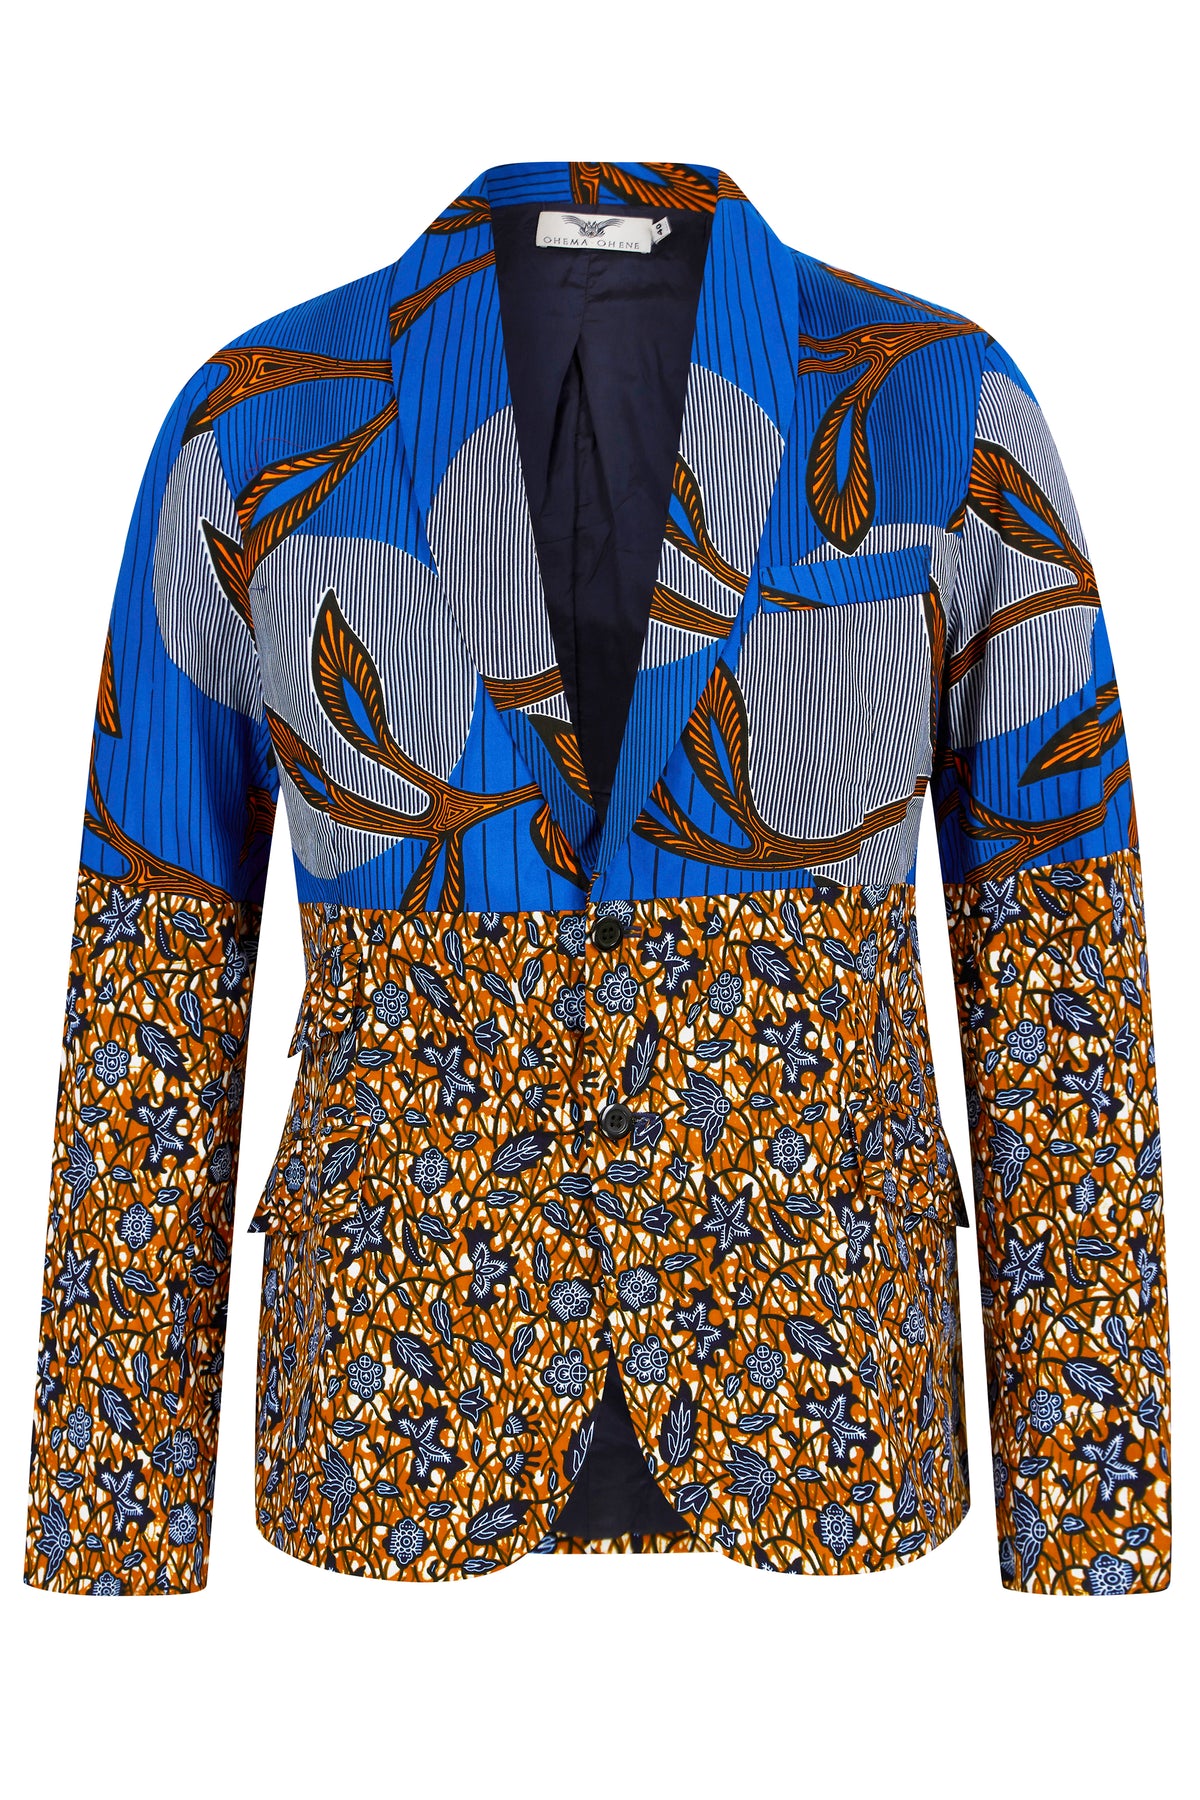 Joshua Print Clash African Print suit- Royal Blue - OHEMA OHENE AFRICAN INSPIRED FASHION